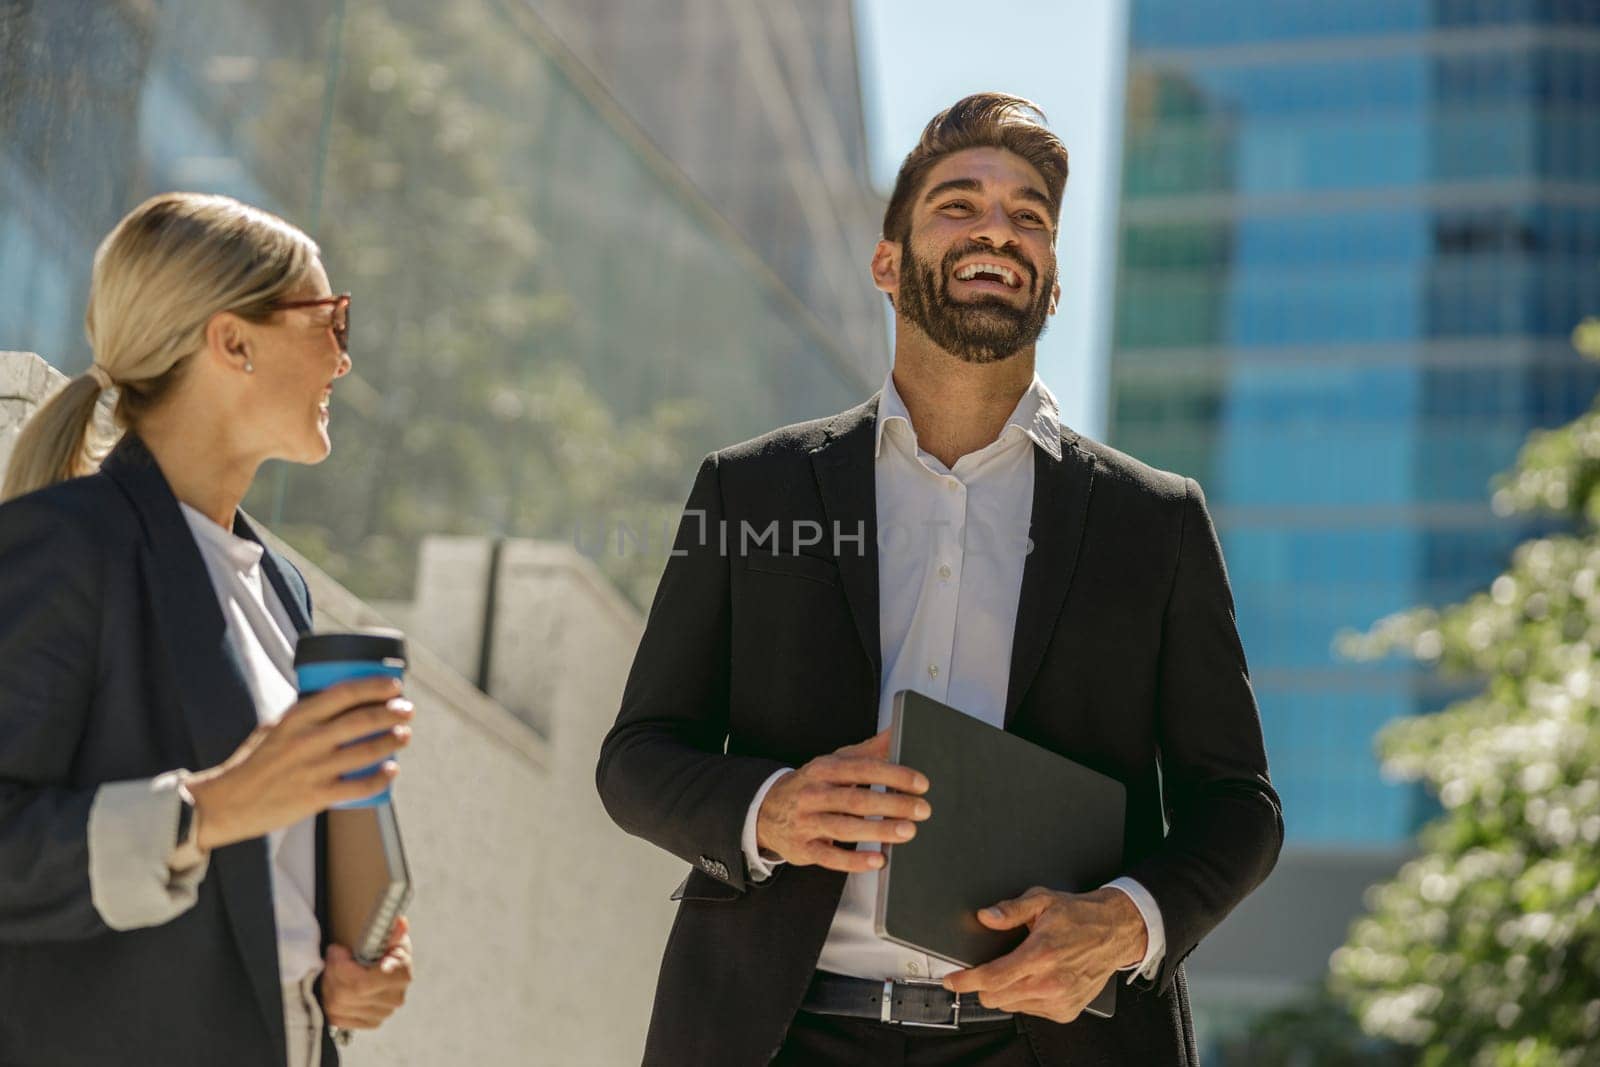 Two managers talking during break standing on background of modern city skyscrapers